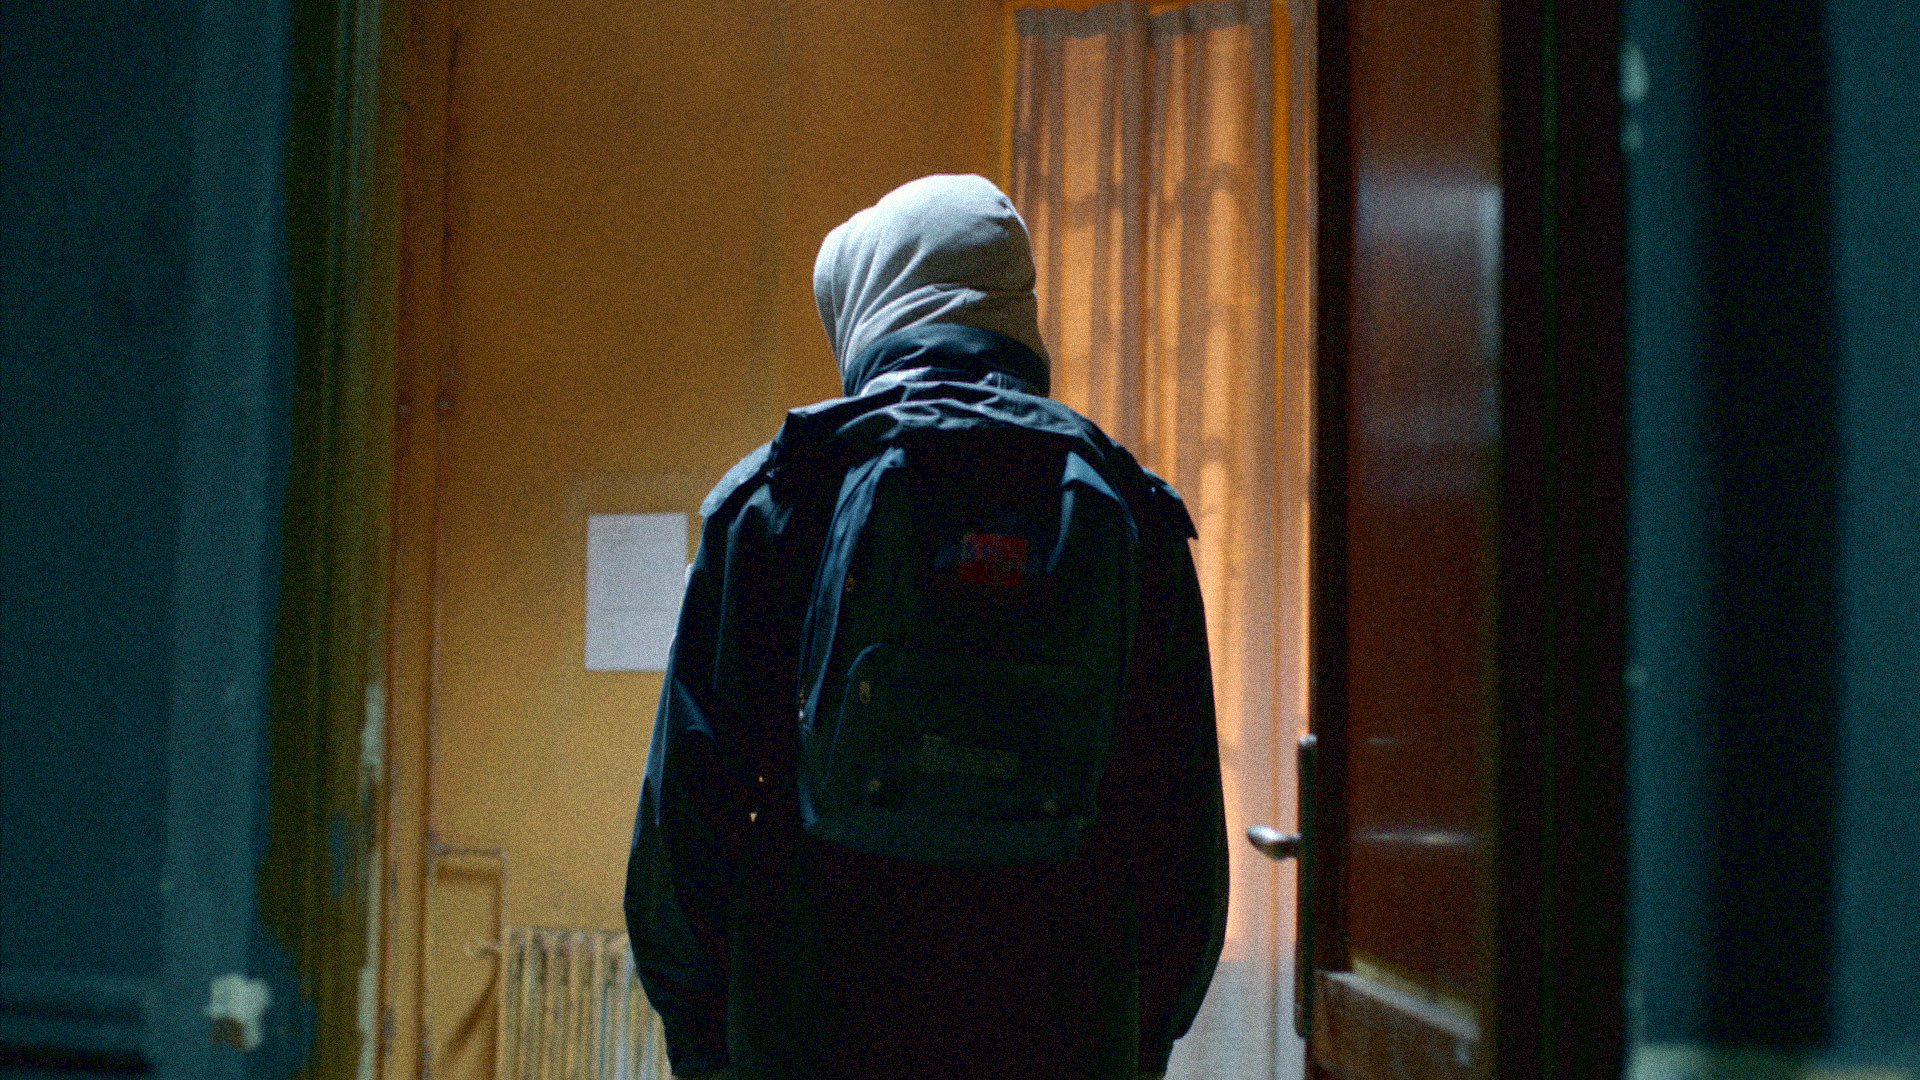 A man in a hood with a backpack walks away from the camera